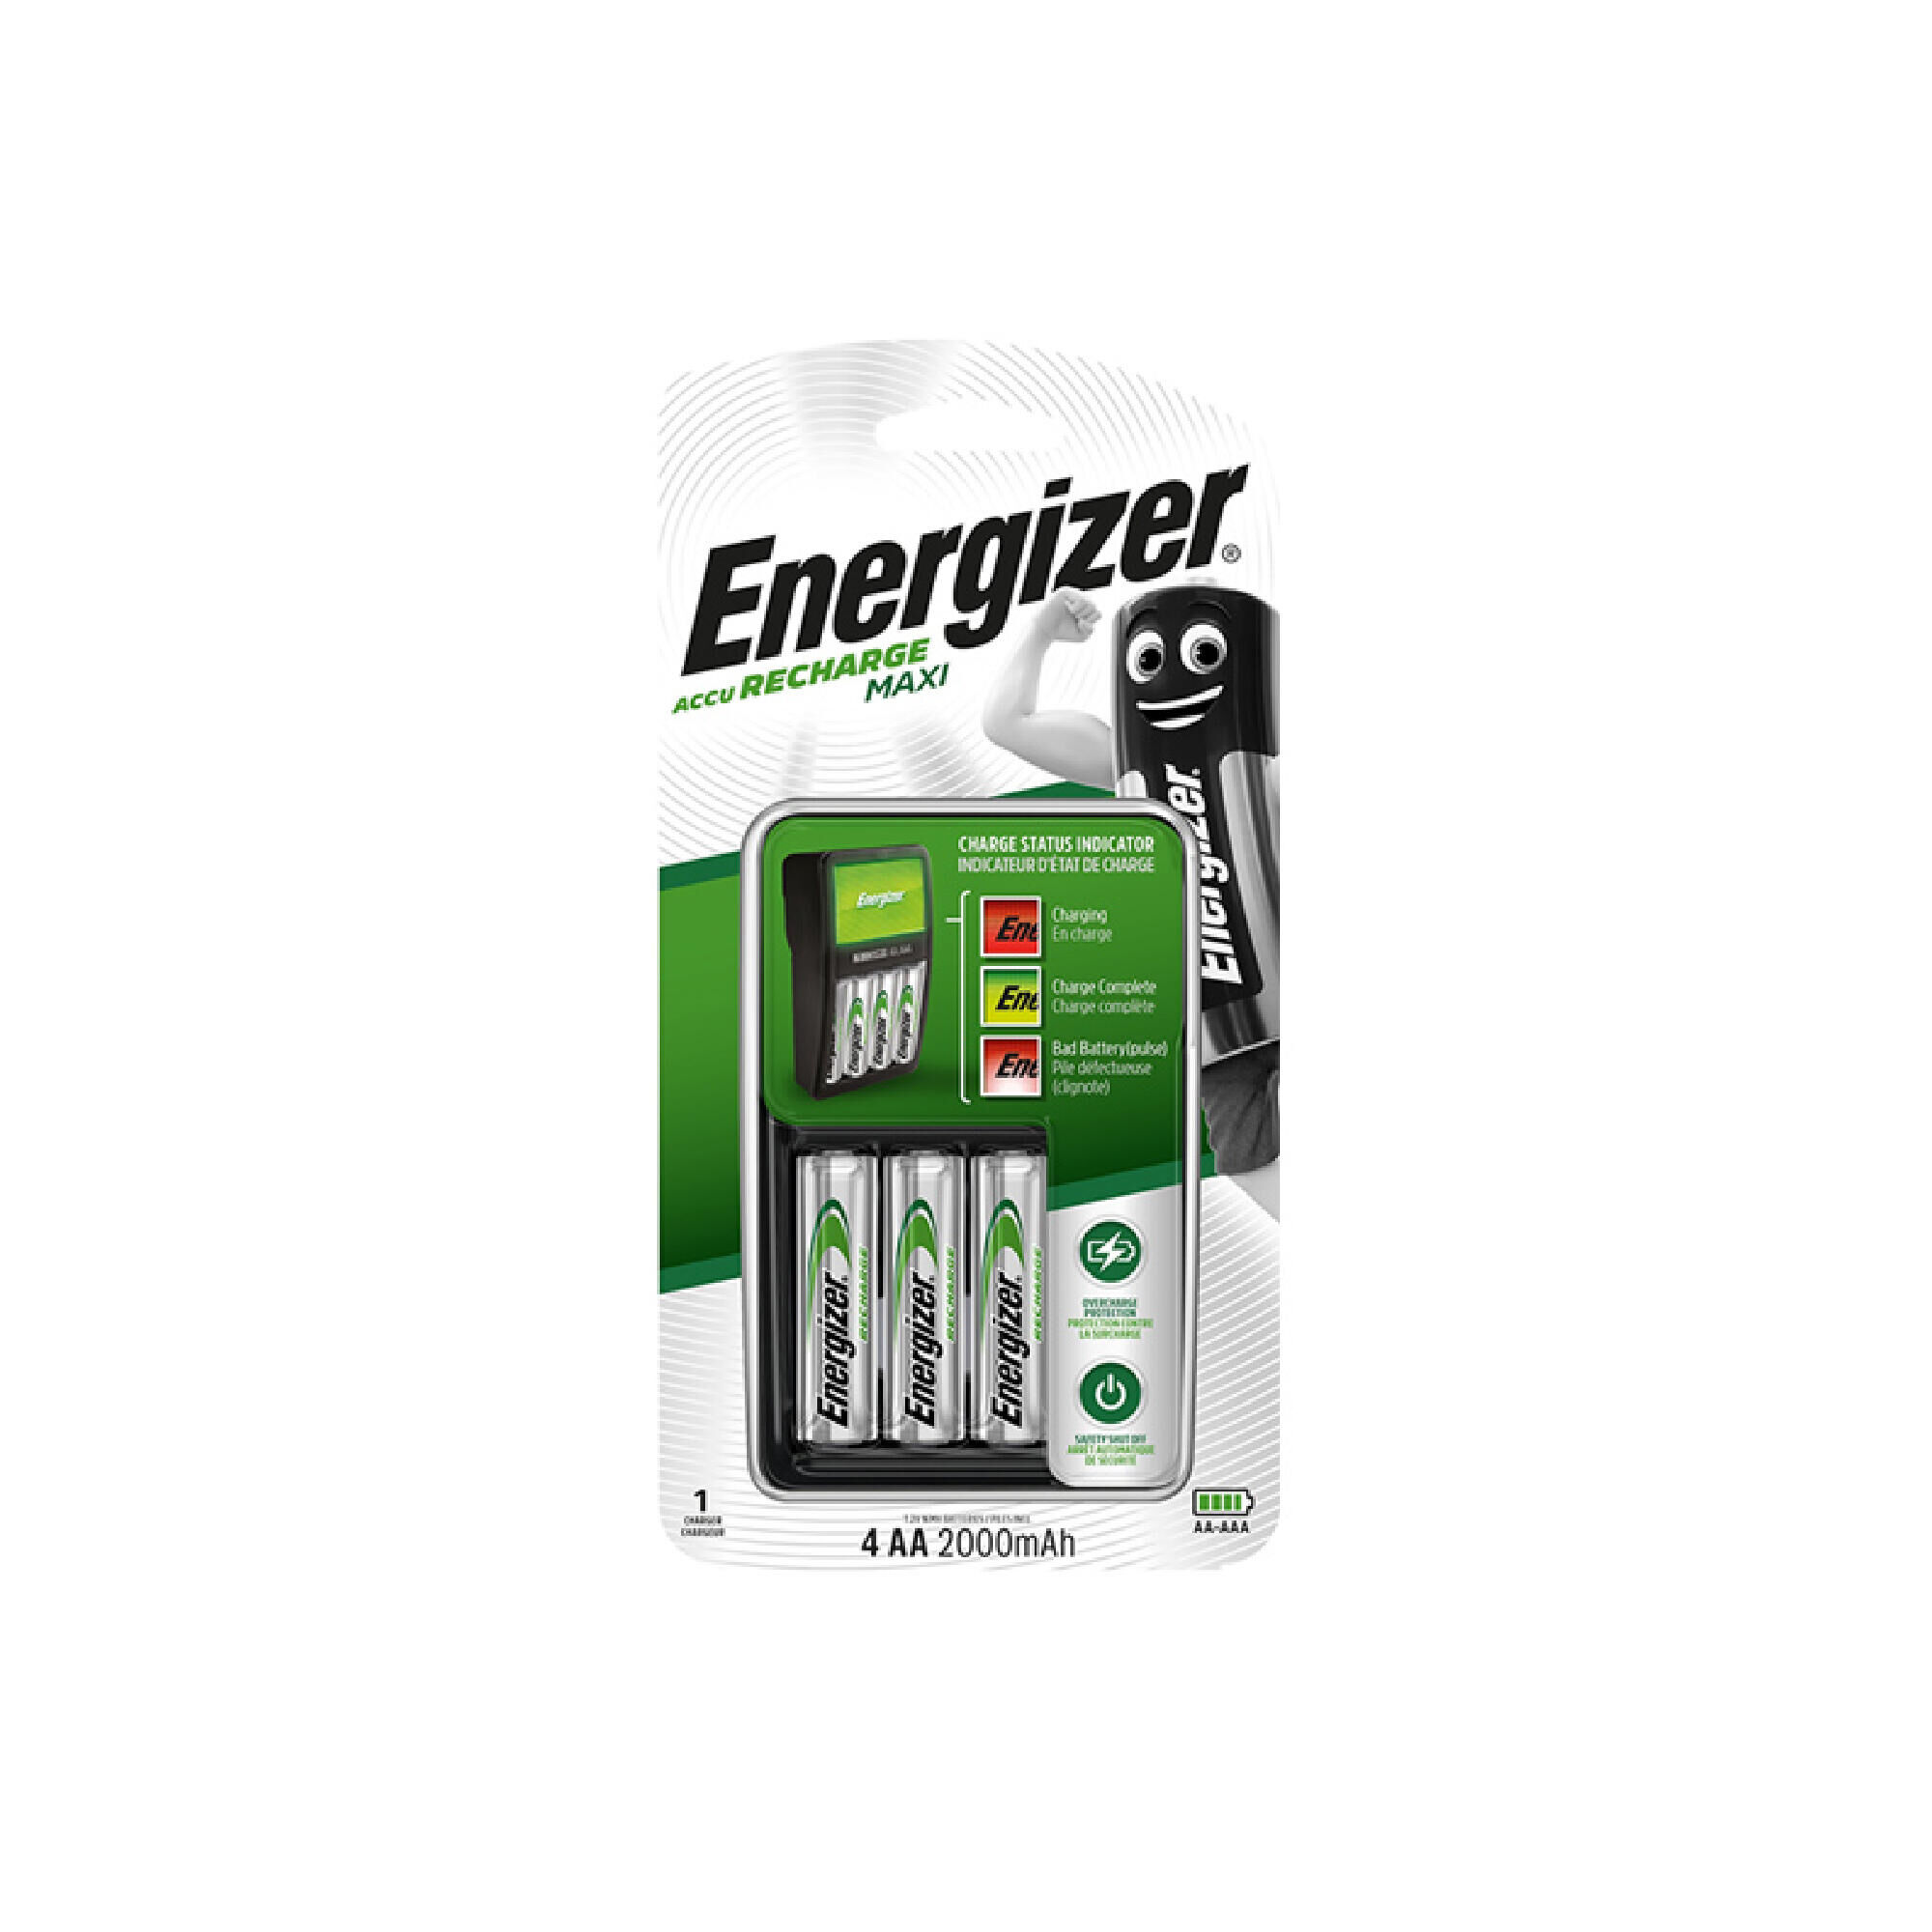 ENERGIZER Maxi Charger for AA/AAA +4 2000mah AA Rechargeable Batteries